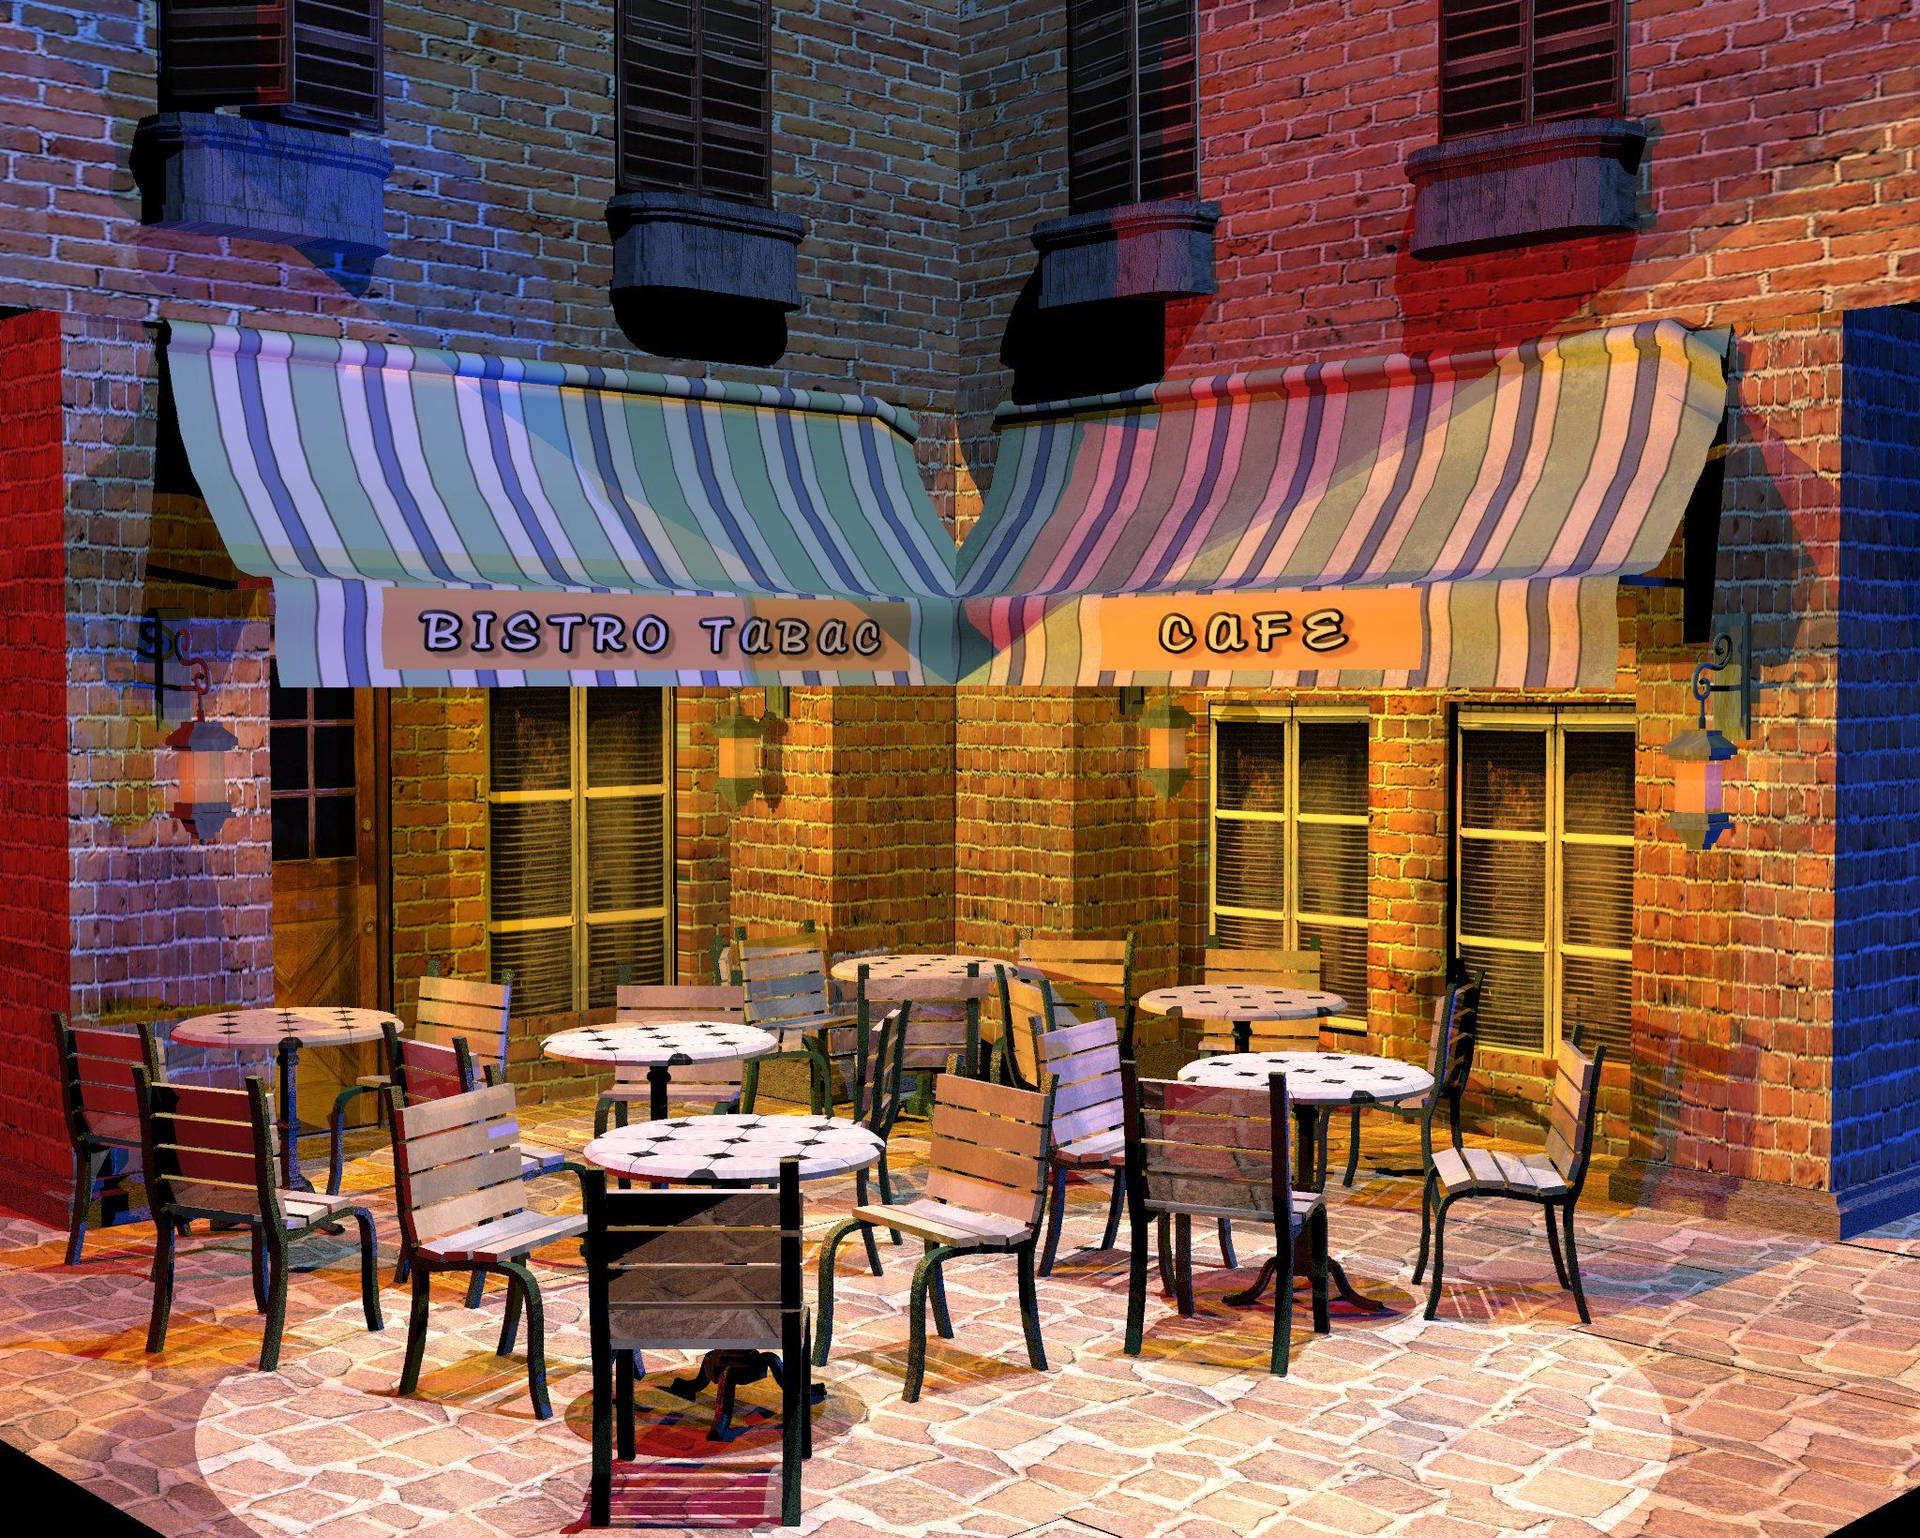 Caption: Cozy Bistro Cafe With Inviting Atmosphere